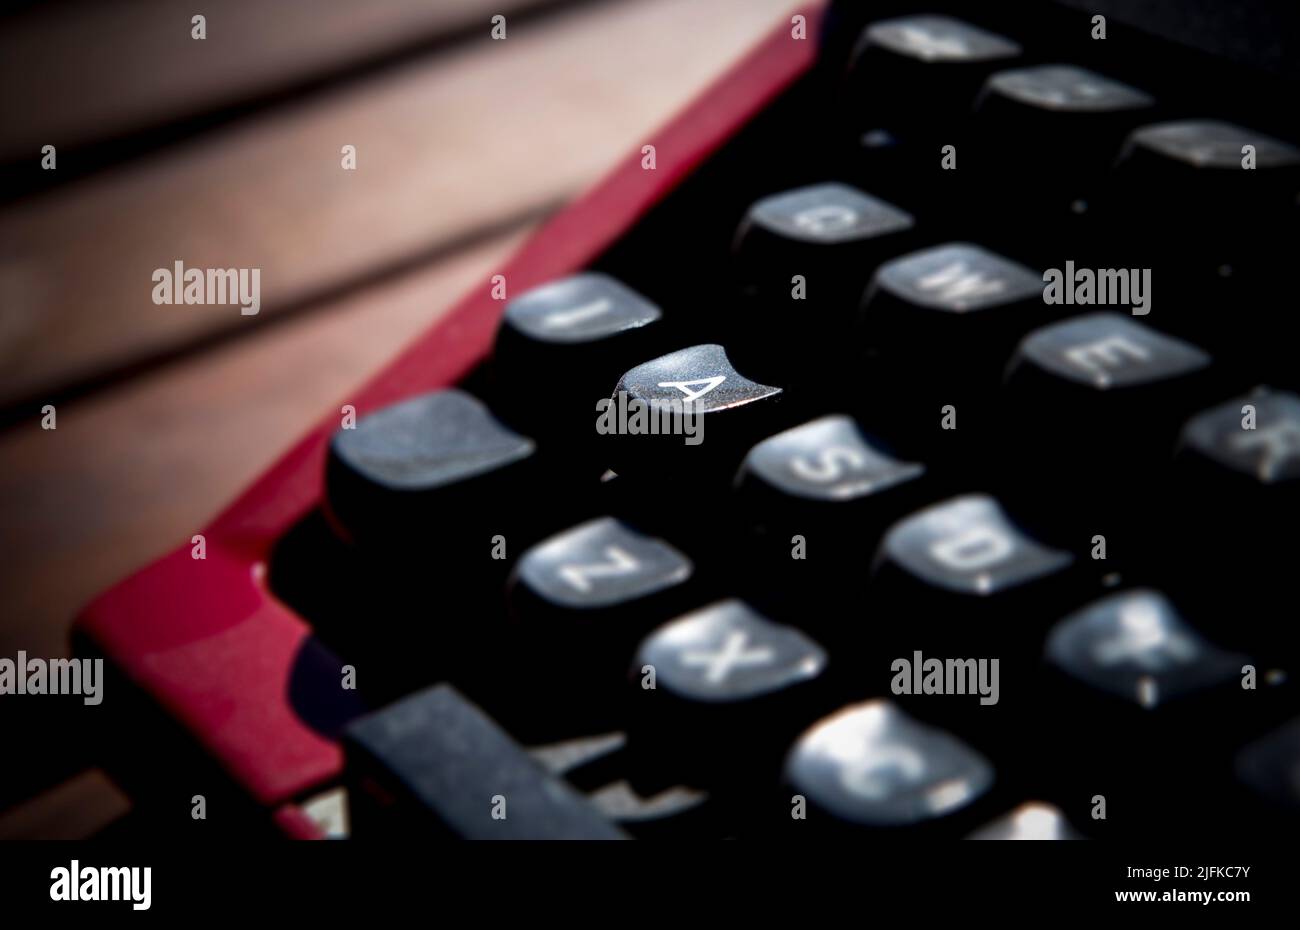 1970s dusty typewriter. Selective focus on key A. Stock Photo